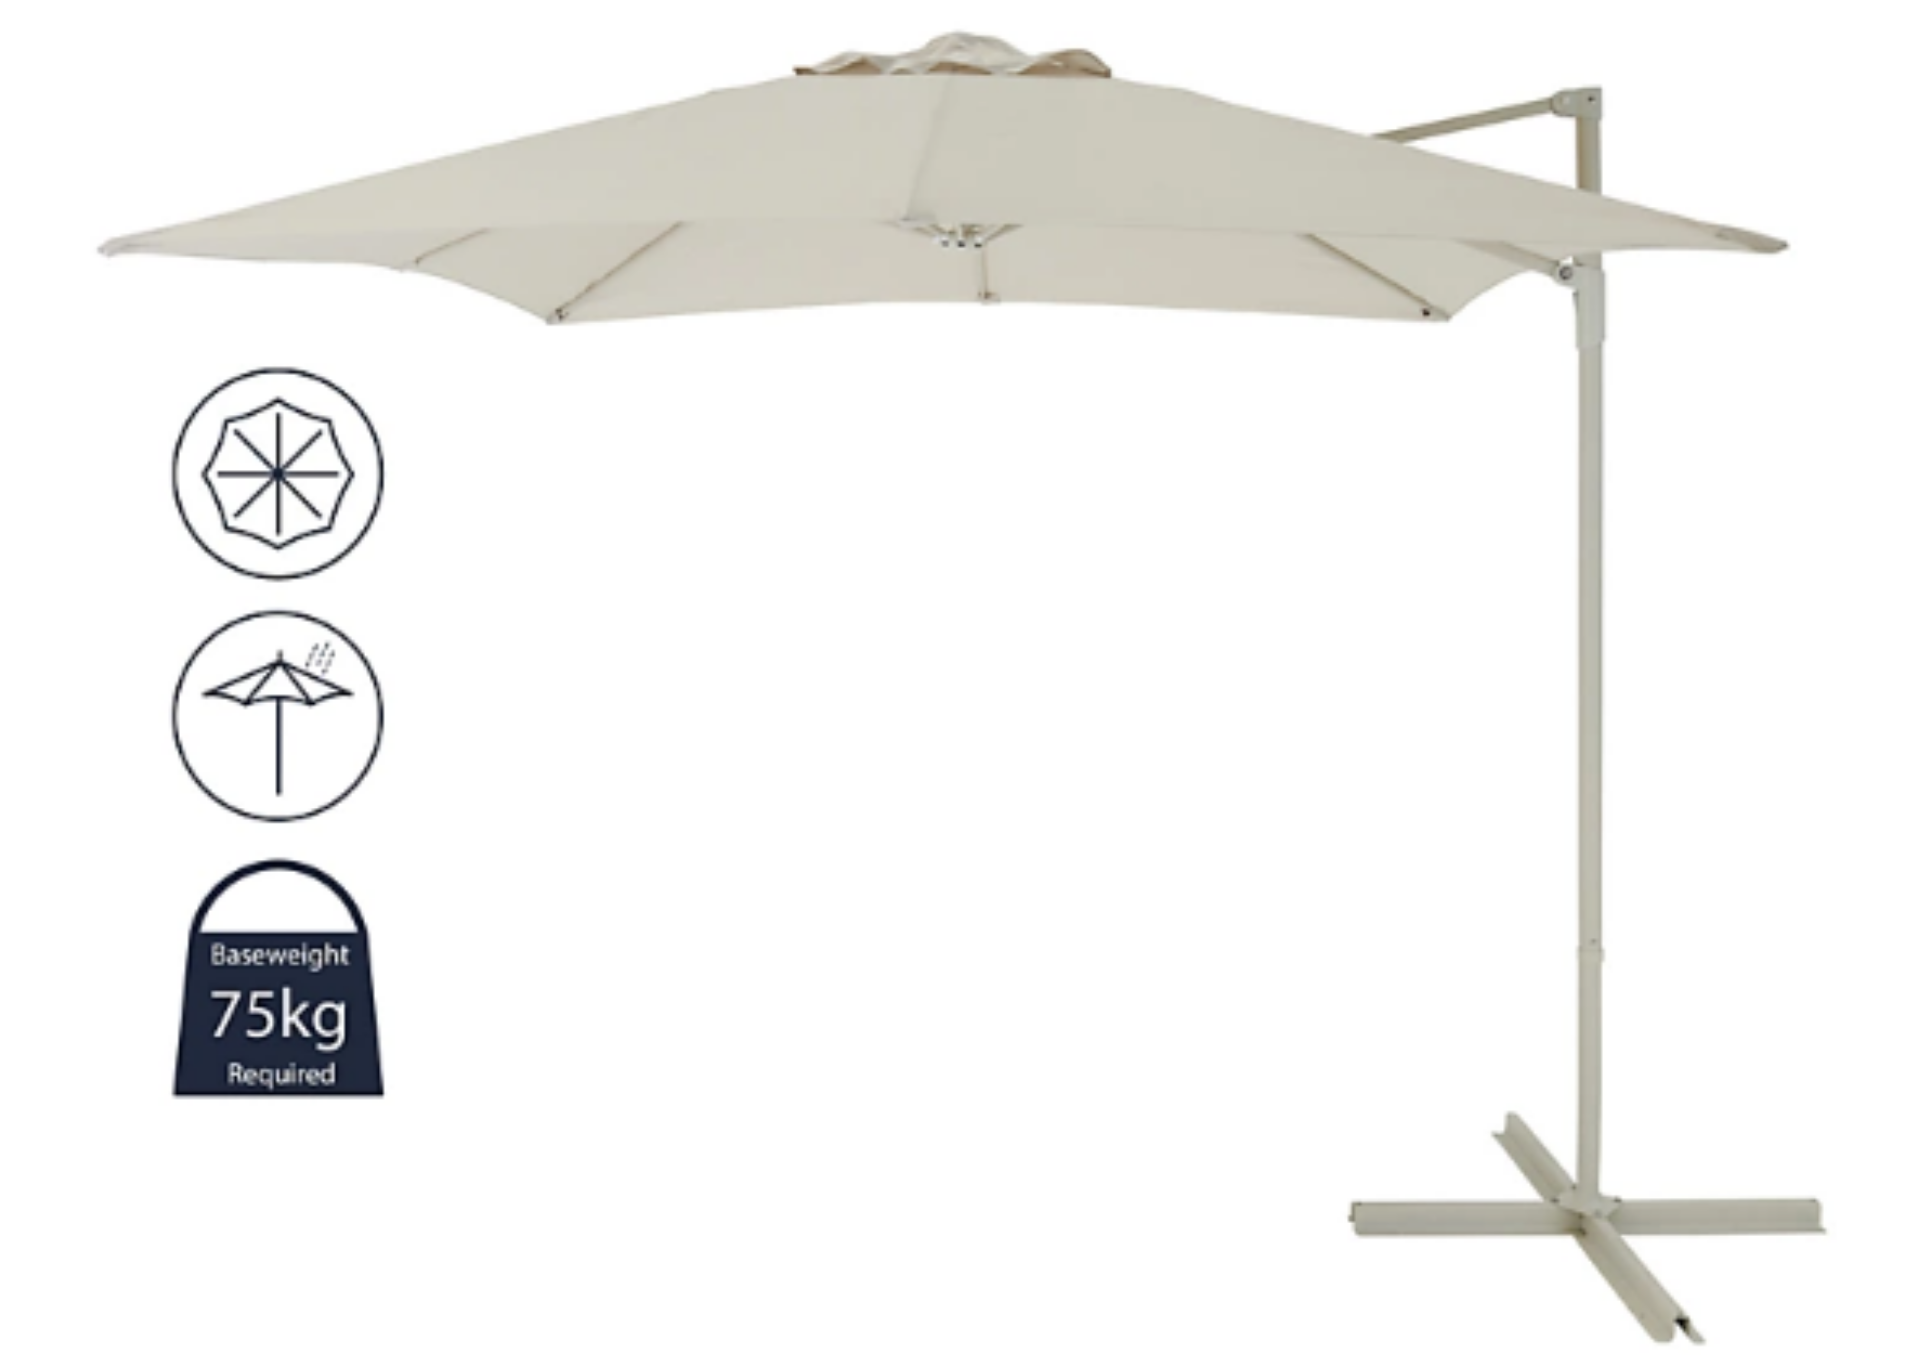 New & Boxed Luxury 2.5m Sand Overhanging Parasol- Sand. This square overhanging parasol provides - Image 5 of 6